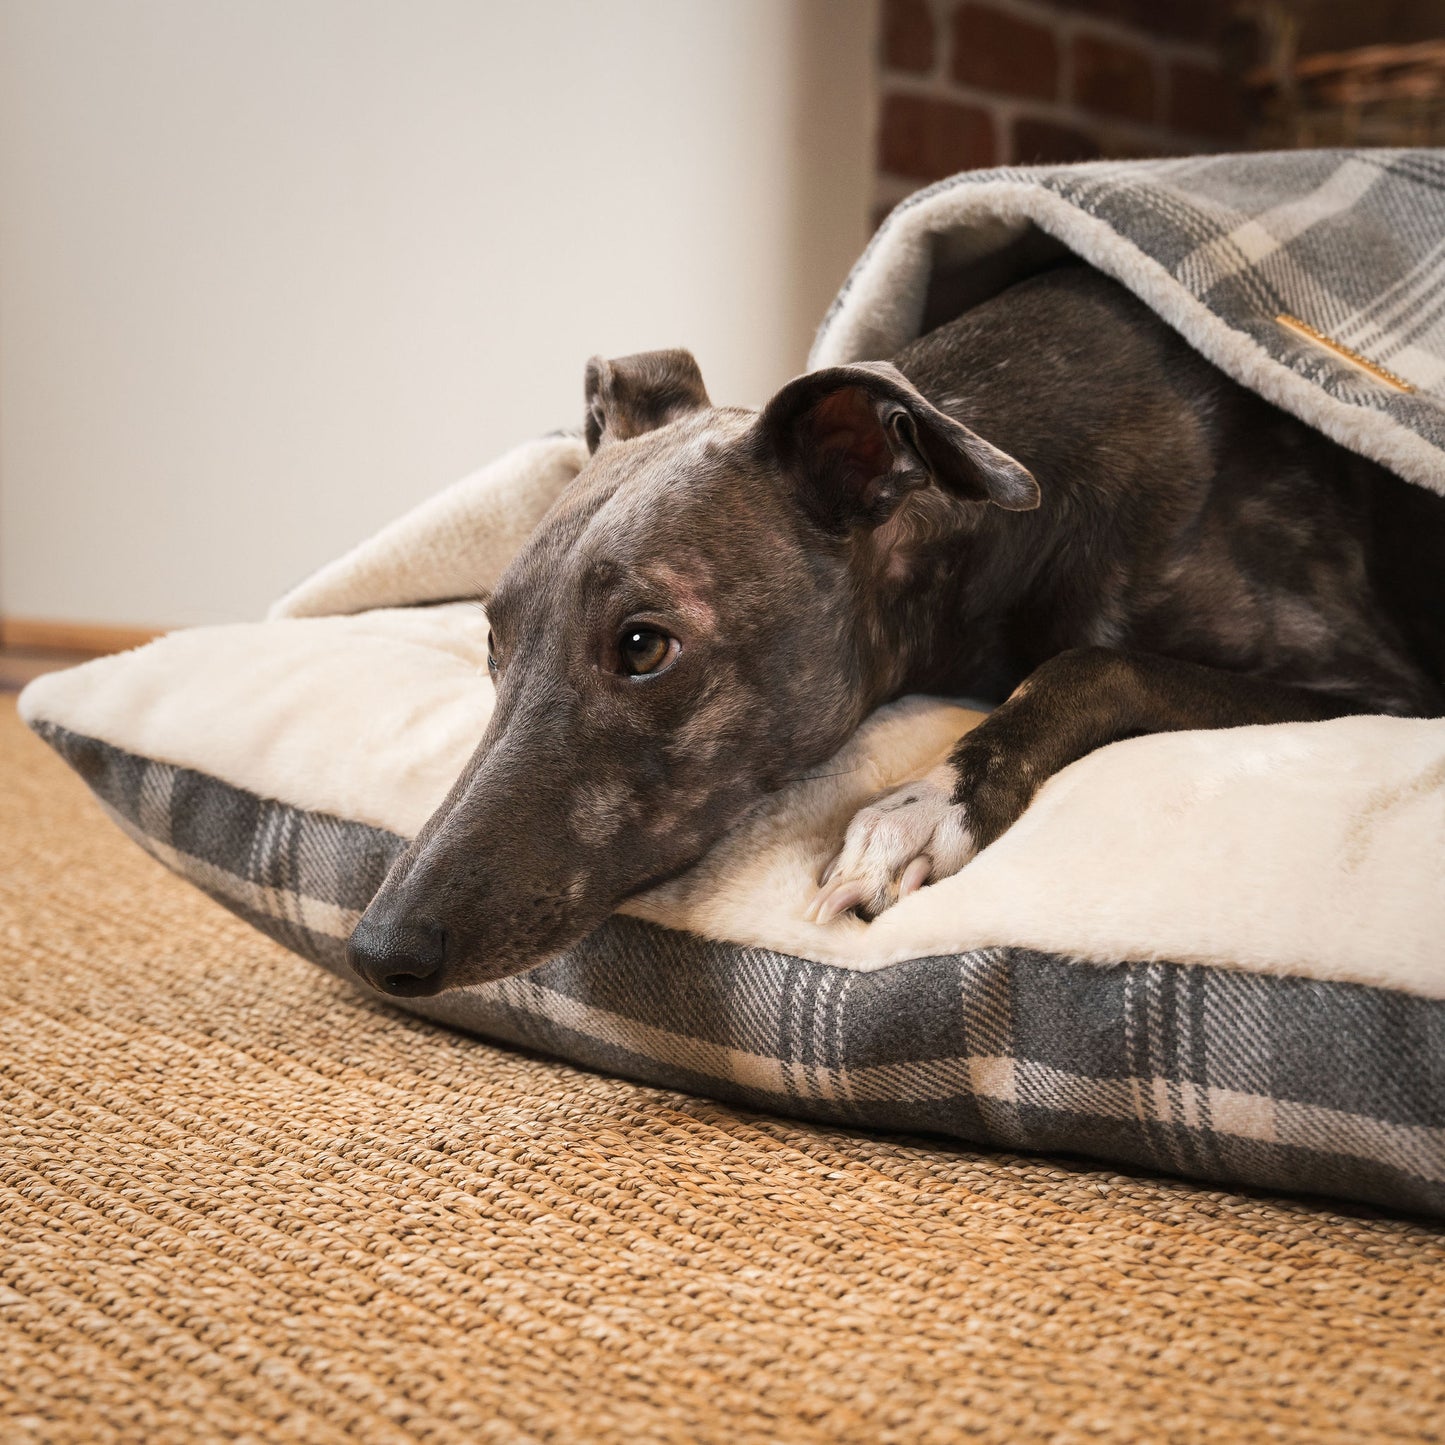 Discover The Perfect Burrow For Your Pet, Our Stunning Sleepy Burrow Dog Beds In Dove Grey Tweed Is The Perfect Bed Choice For Your Pet, Available Now at Lords & Labradors US